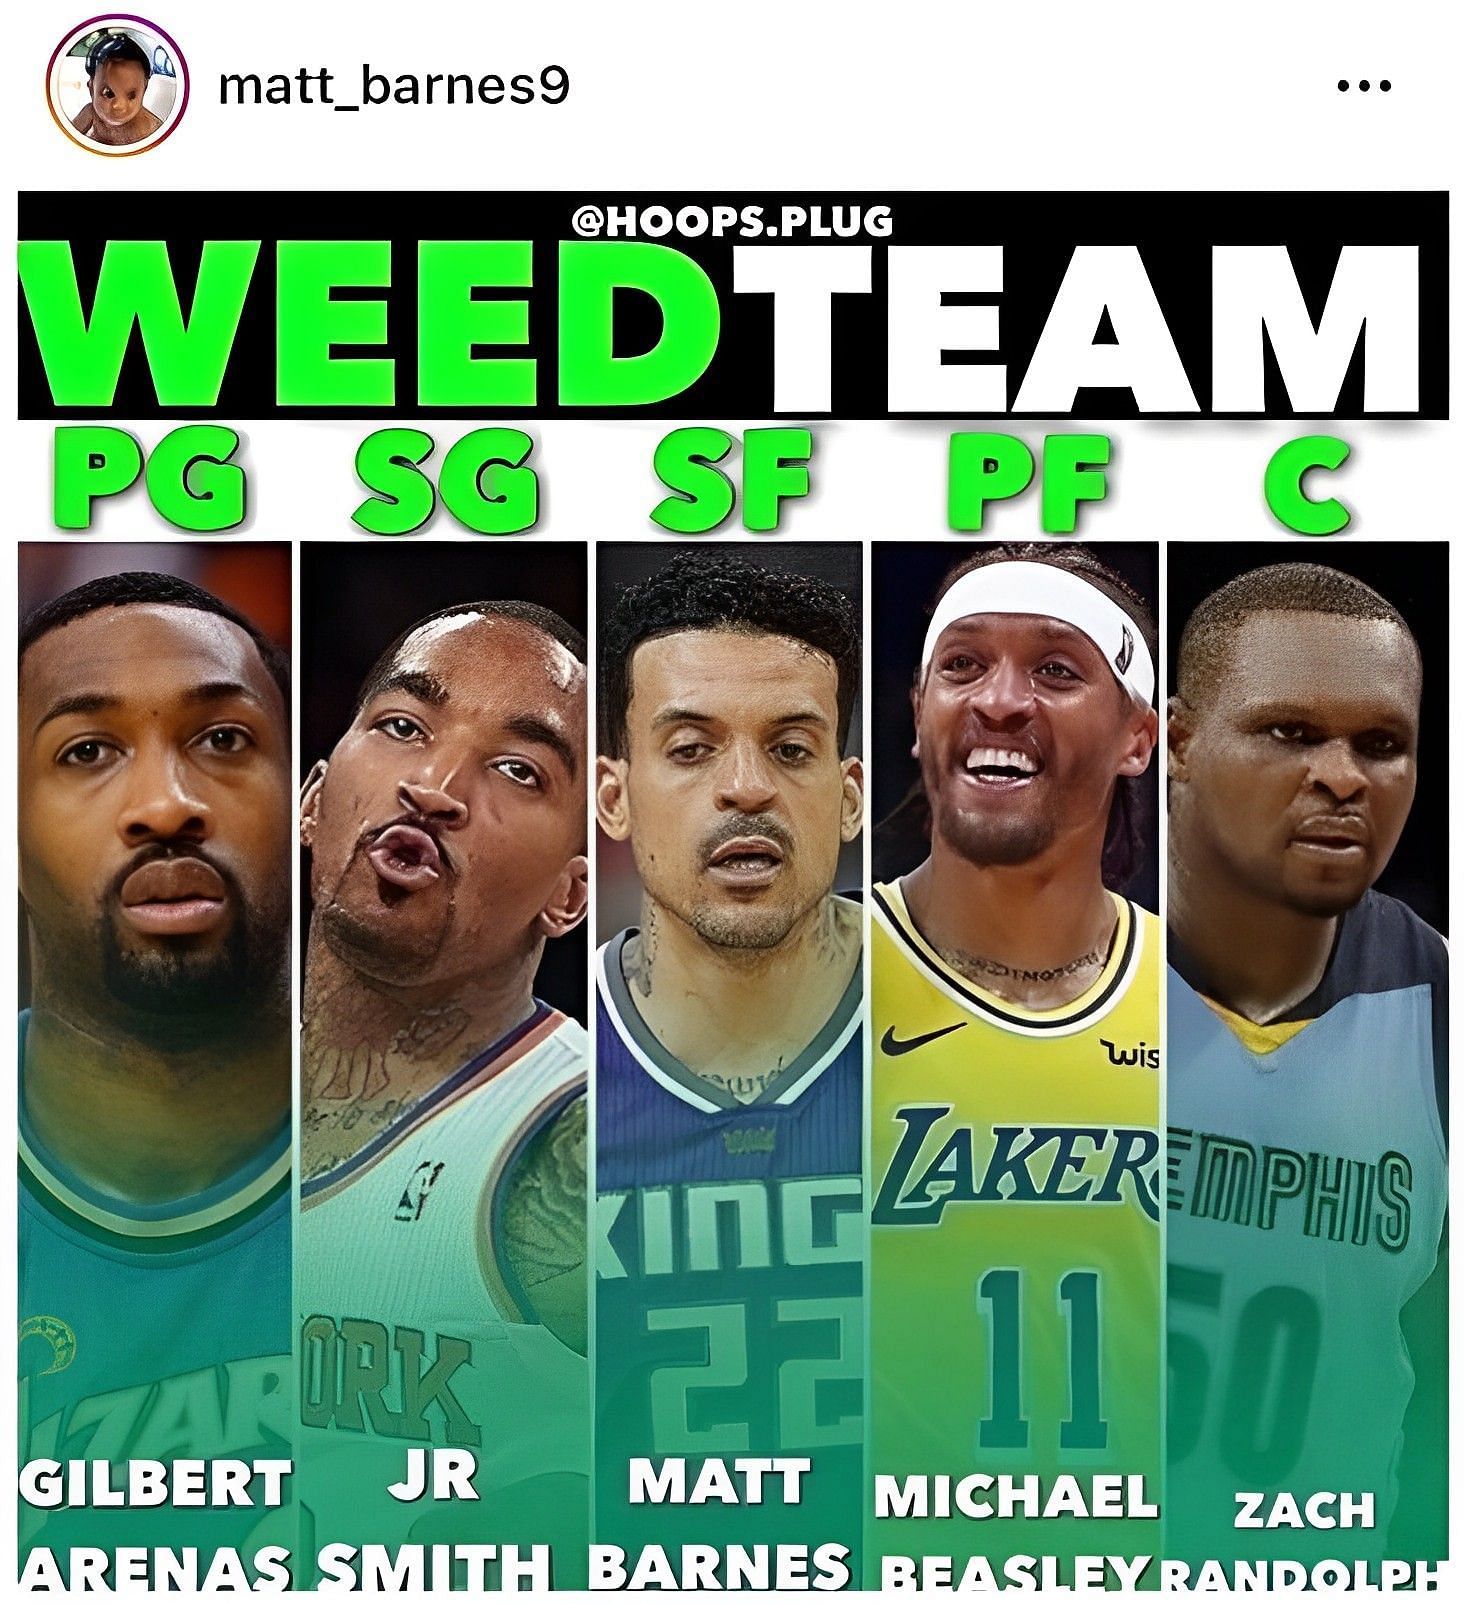 Barnes includes Arenas to the All-Weed Team of the NBA